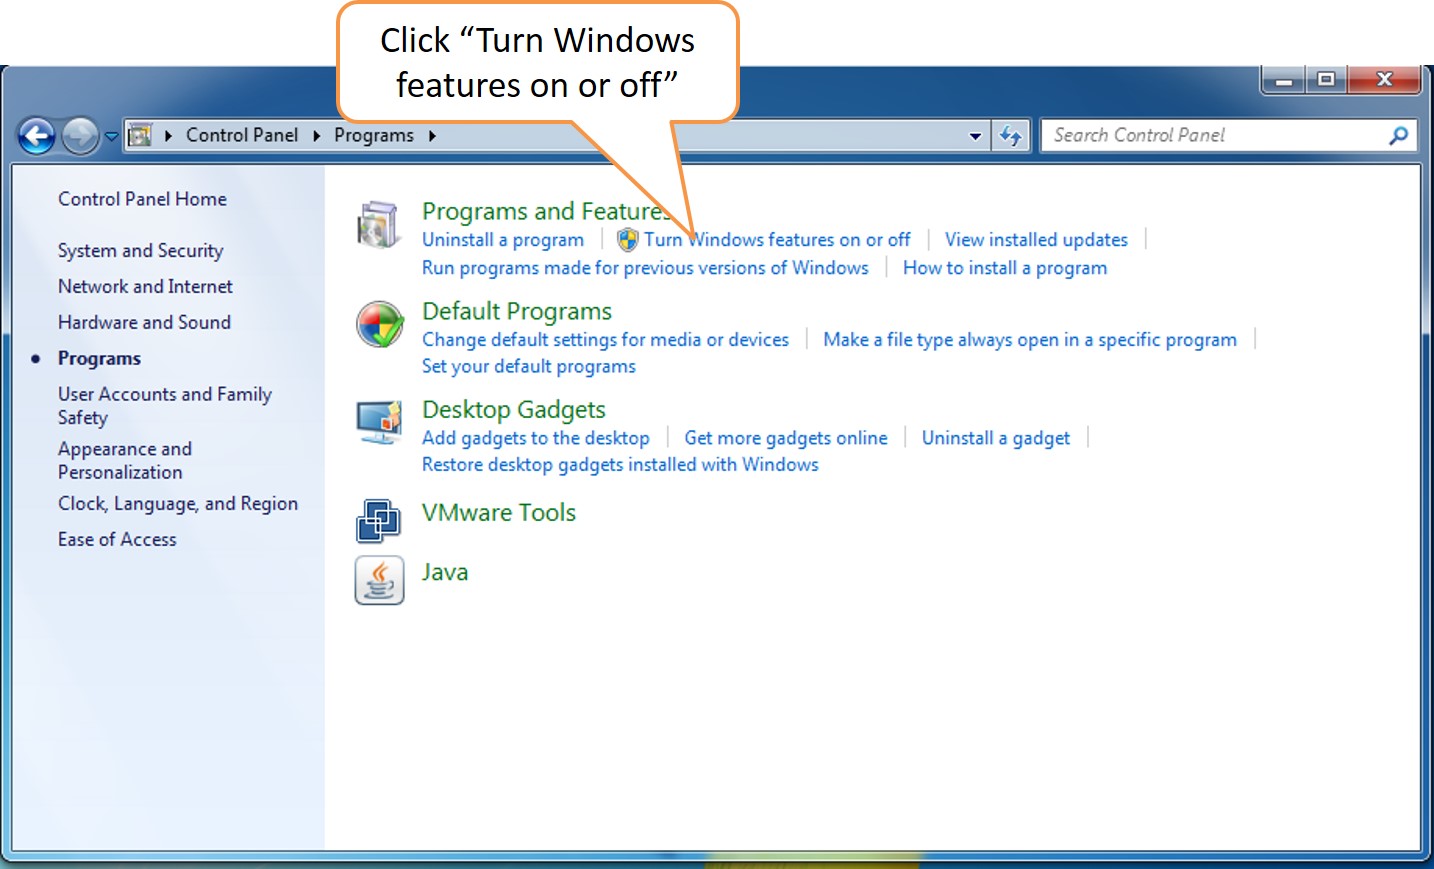 Windows 7 required features